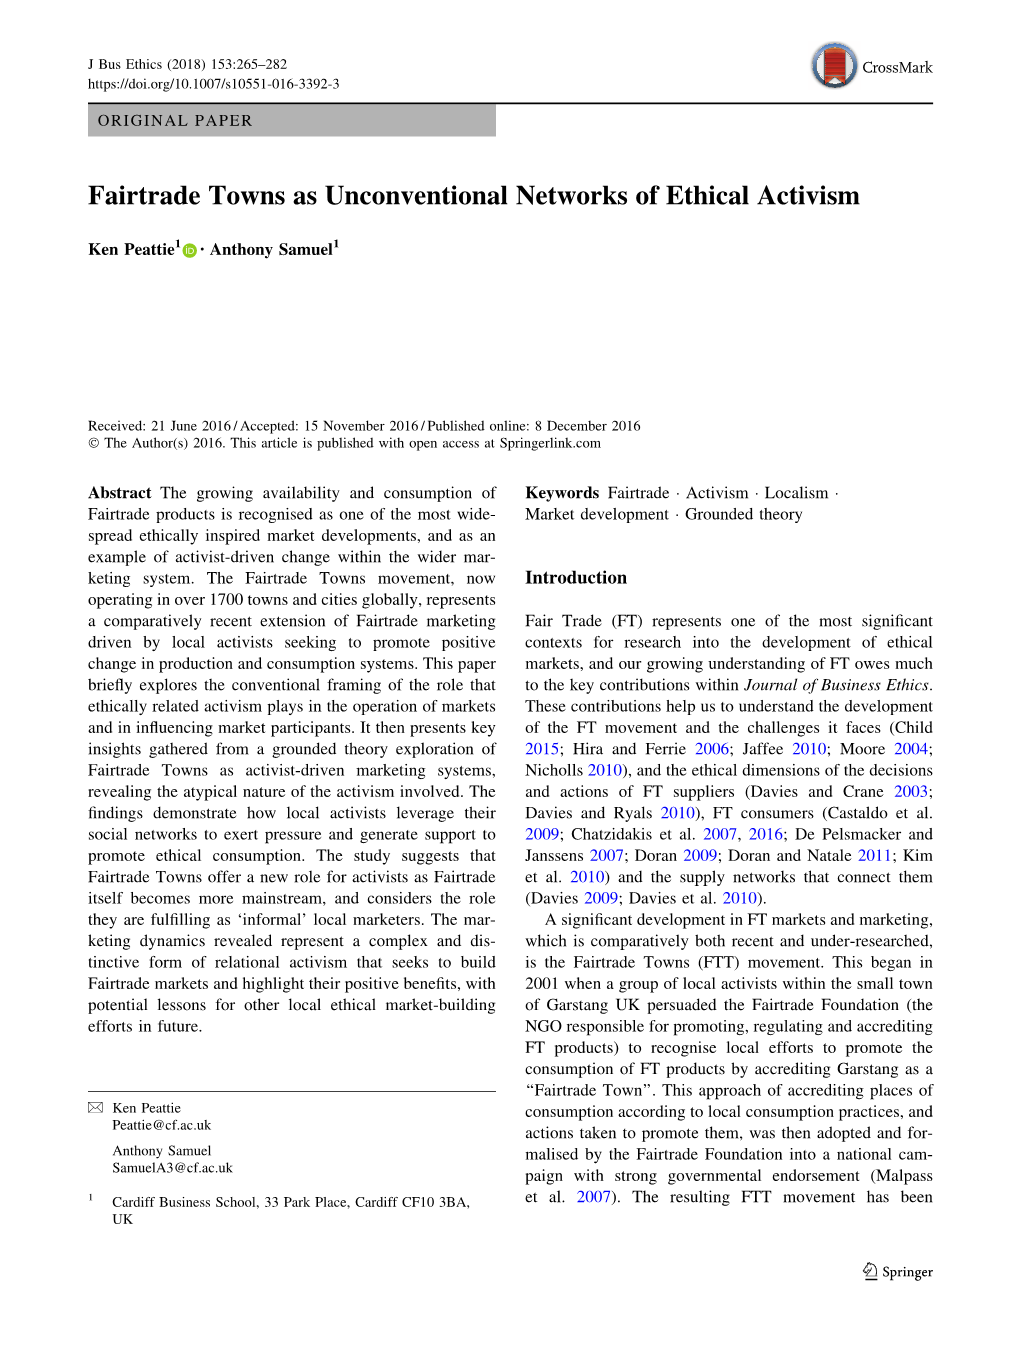 Fairtrade Towns As Unconventional Networks of Ethical Activism